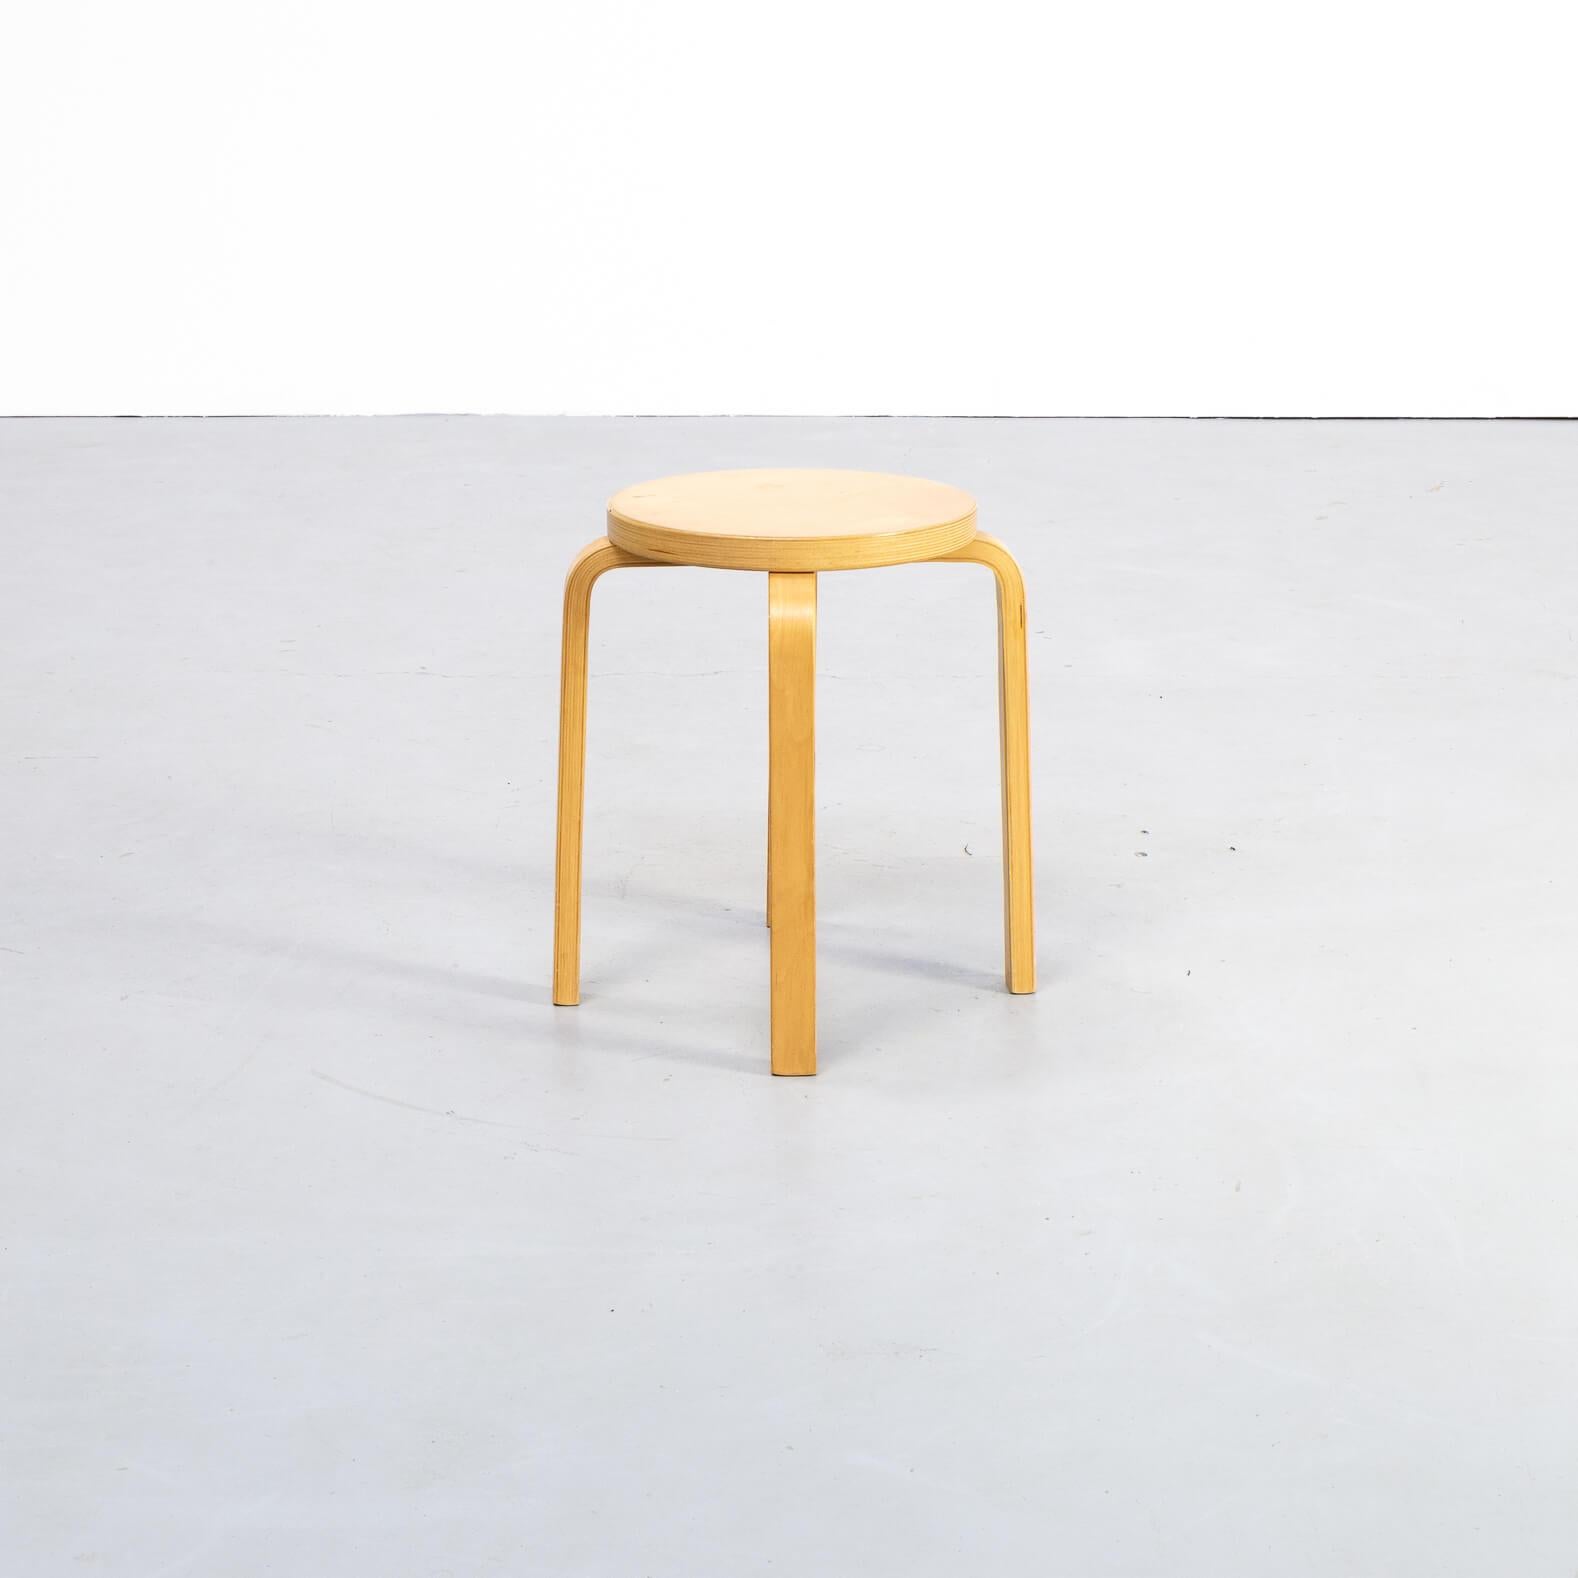 Aalto called the L-leg “the little sister of the architectural column,” and its arrival announced a break with longstanding traditions of furniture production. Patented by Aalto in 1933, this technique meant that the warm, organic qualities of wood